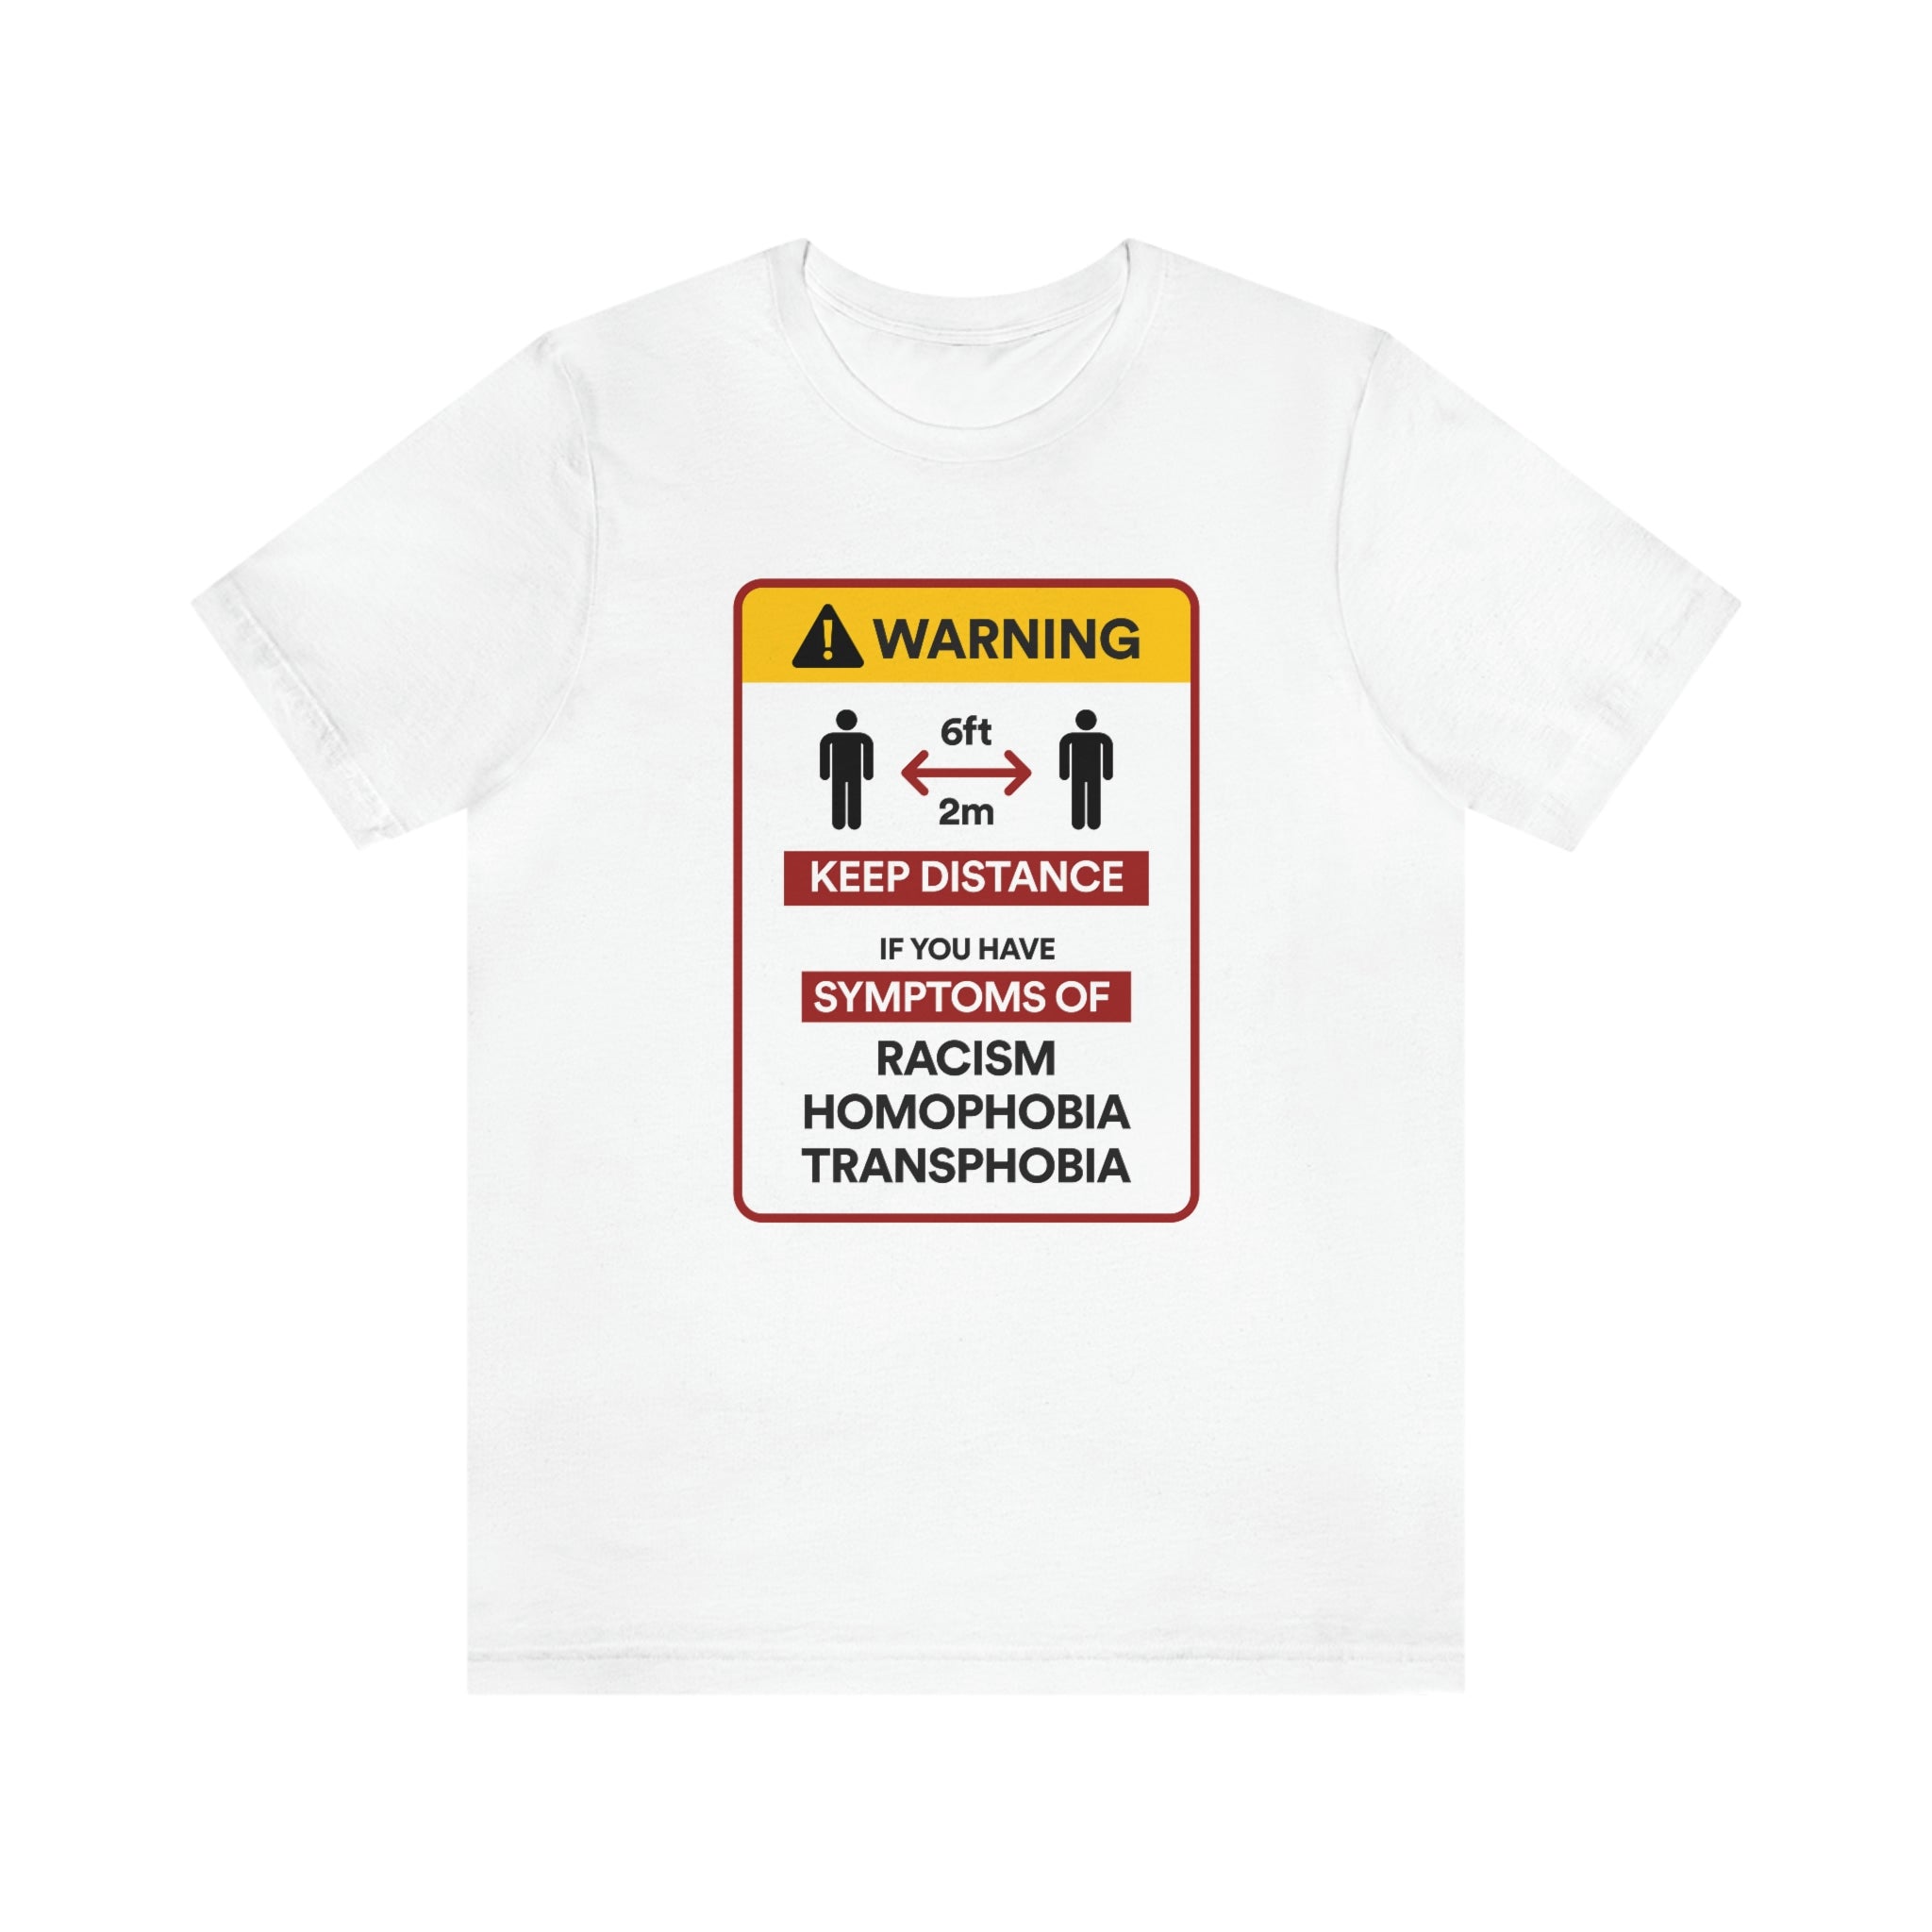 Social Distancing Warning : Unisex 100% Comfy Cotton, T-Shirt by Bella+Canvas